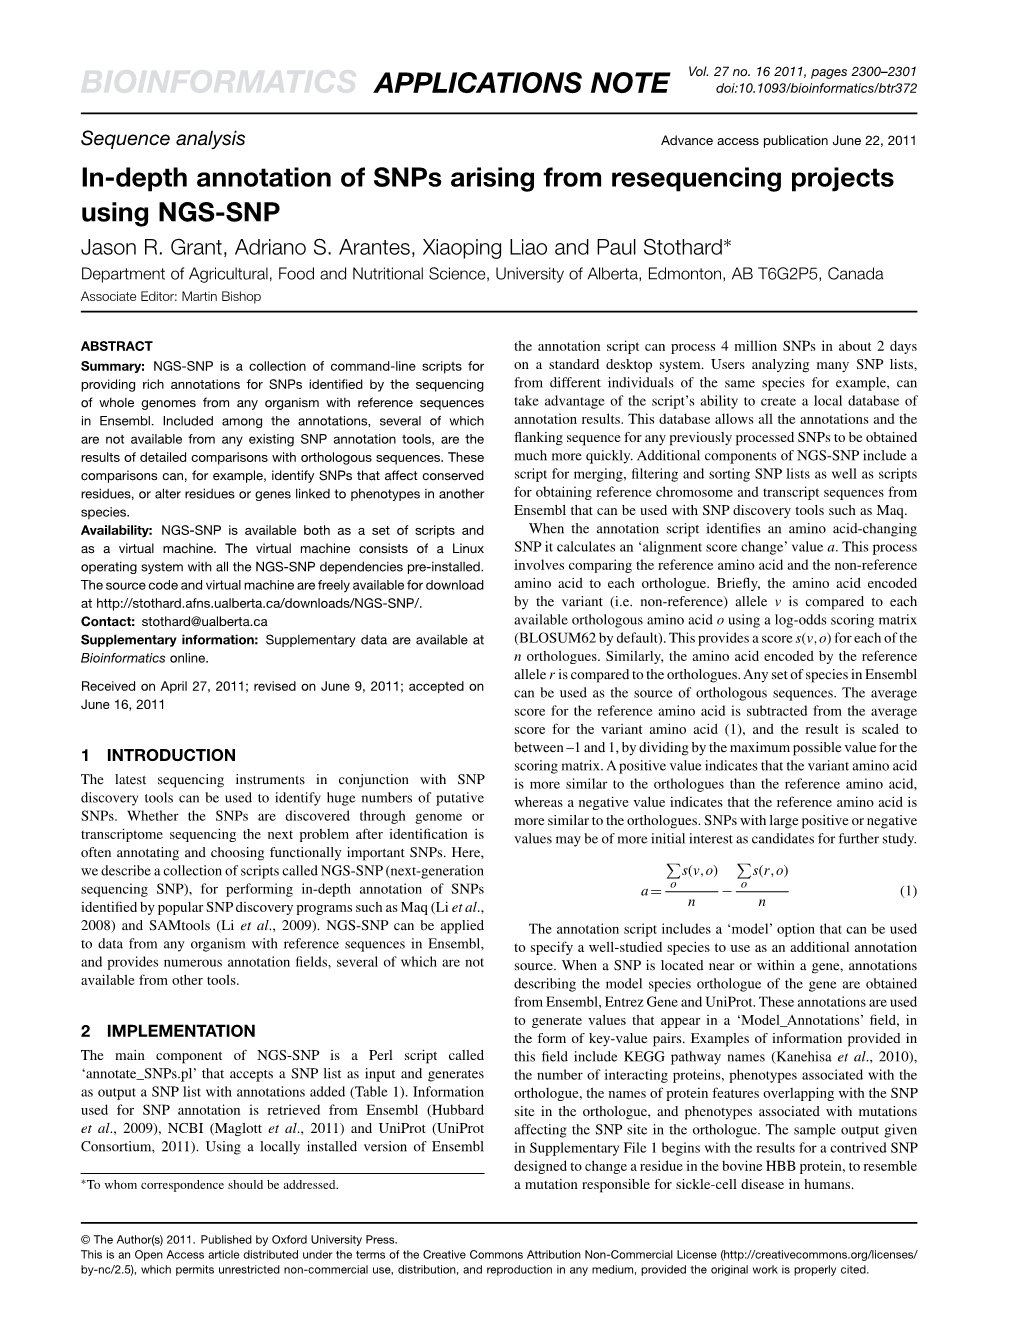 In-Depth Annotation of Snps Arising from Resequencing Projects Using NGS-SNP Jason R